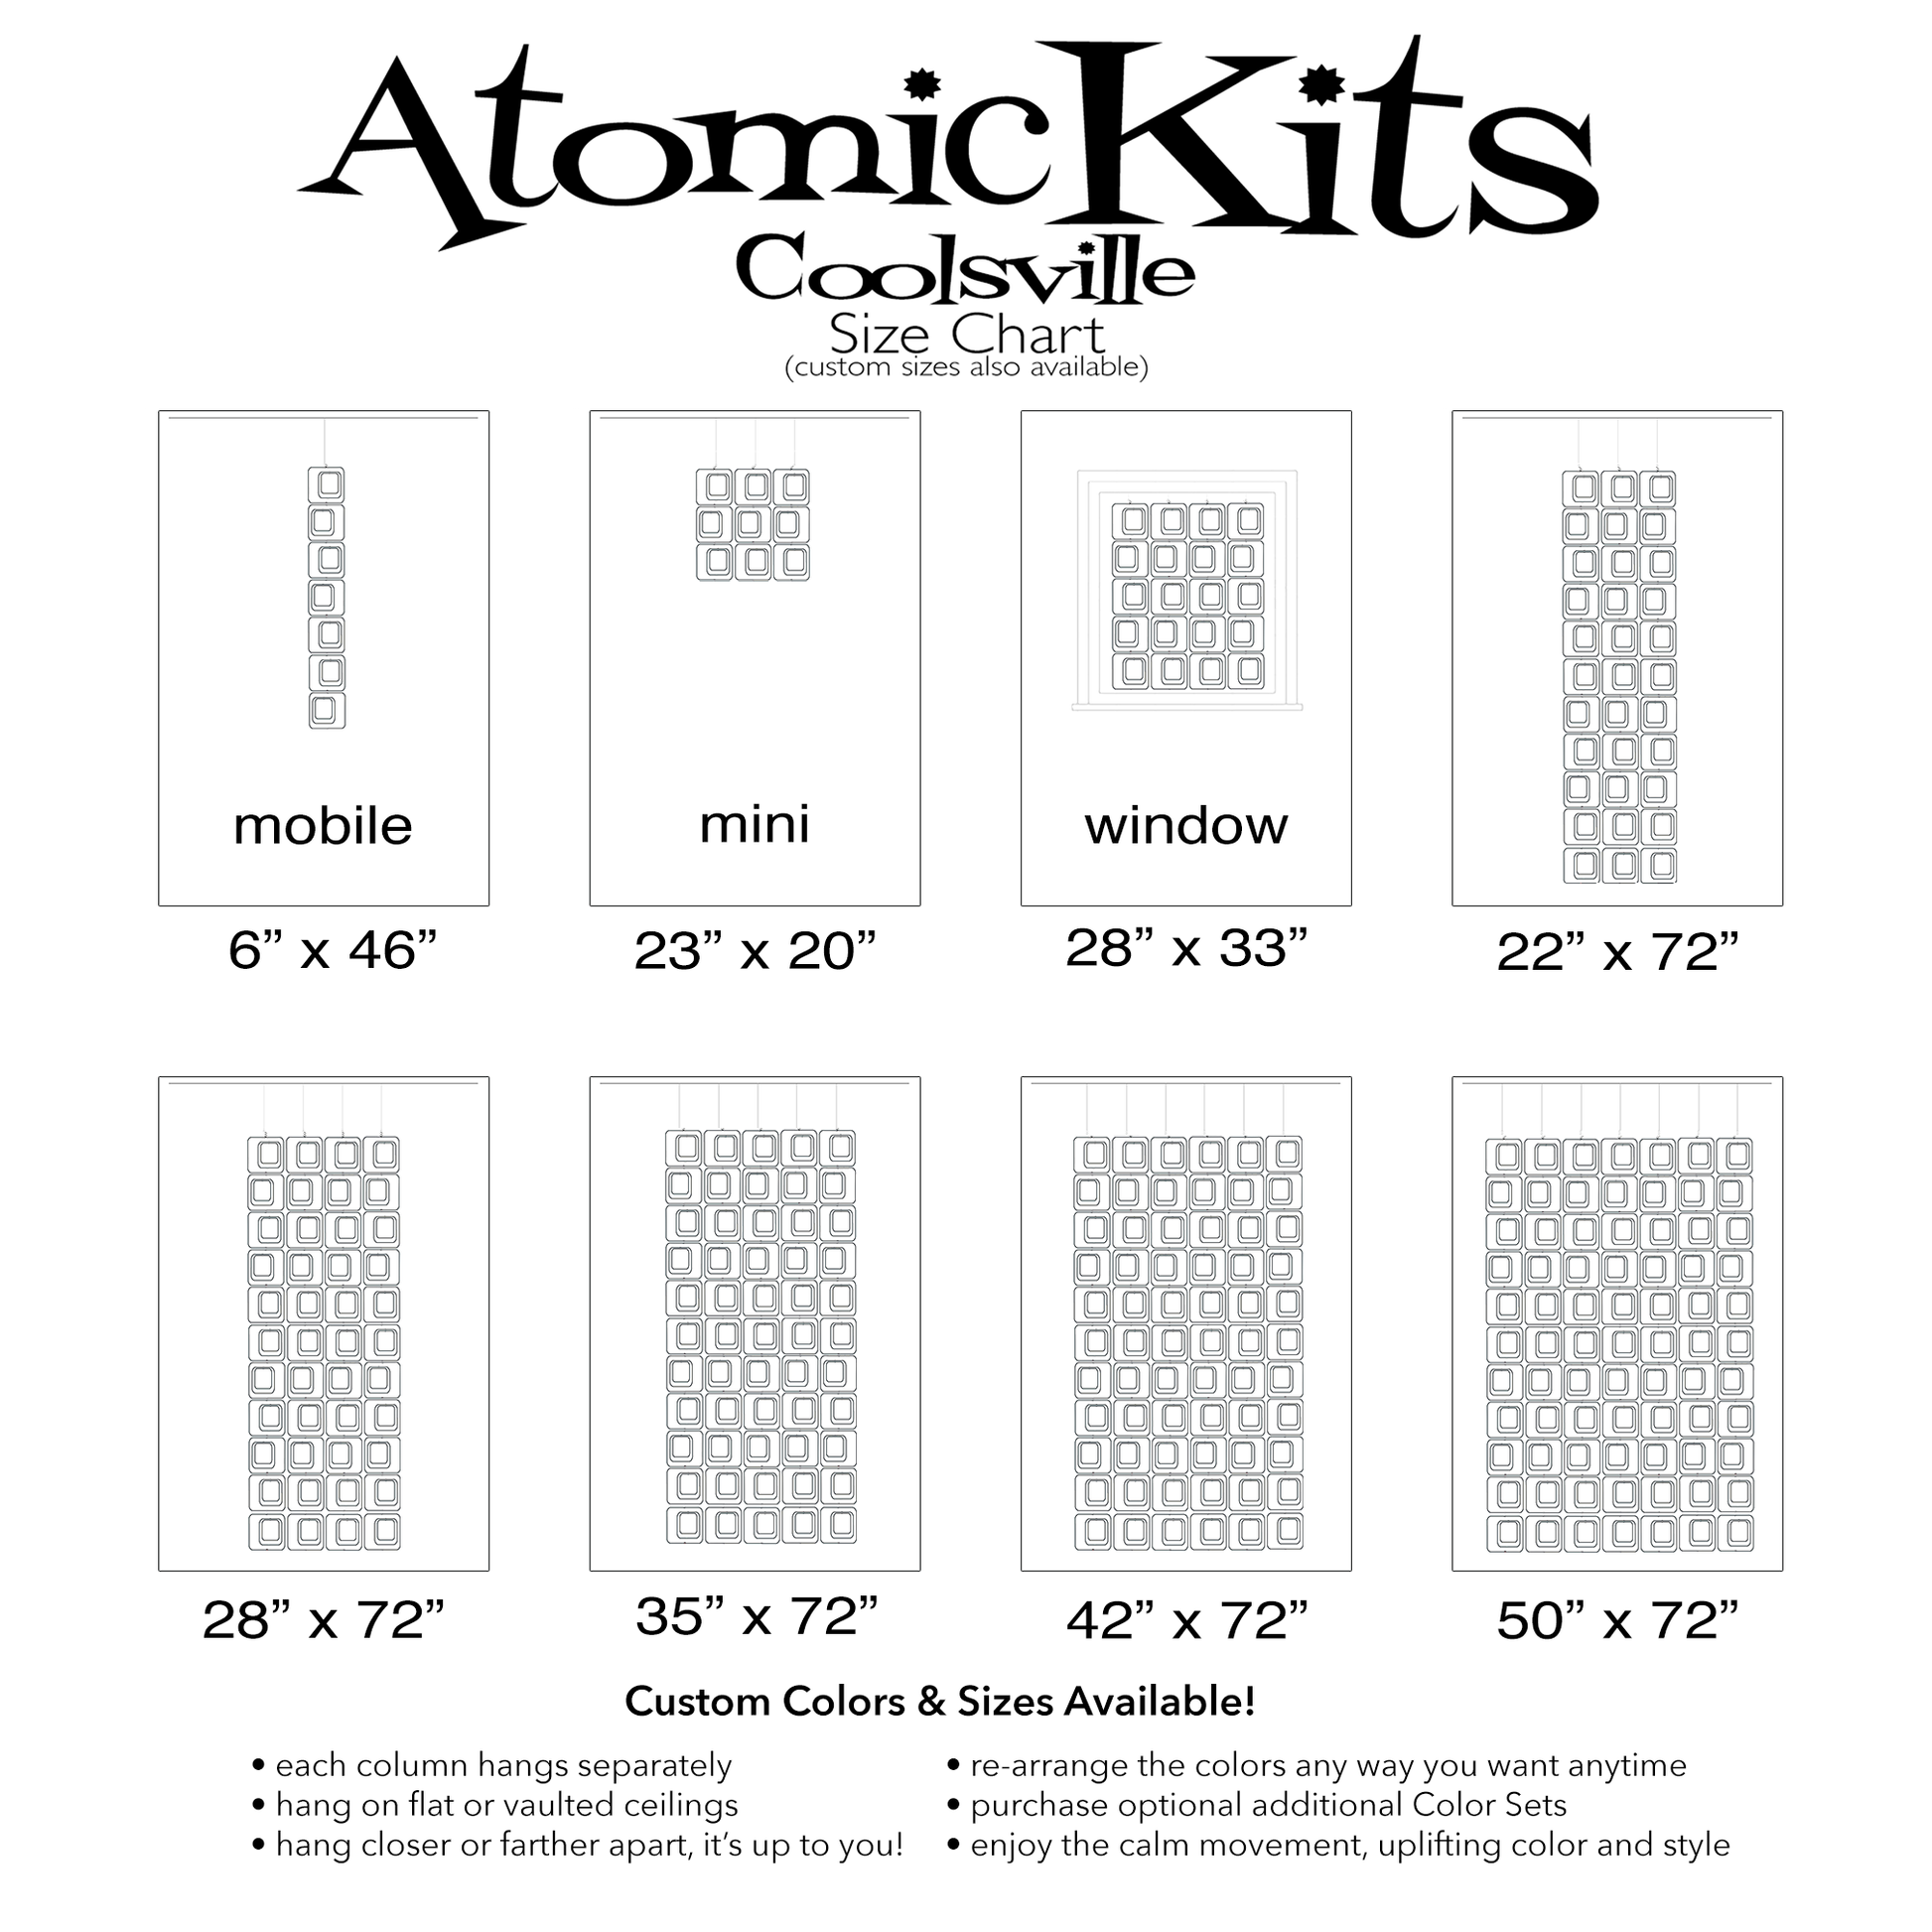 Size Chart for Coolsville in White for Room Dividers, Curtains, Mobiles, and Wall Art DIY KIT by AtomicMobiles.com